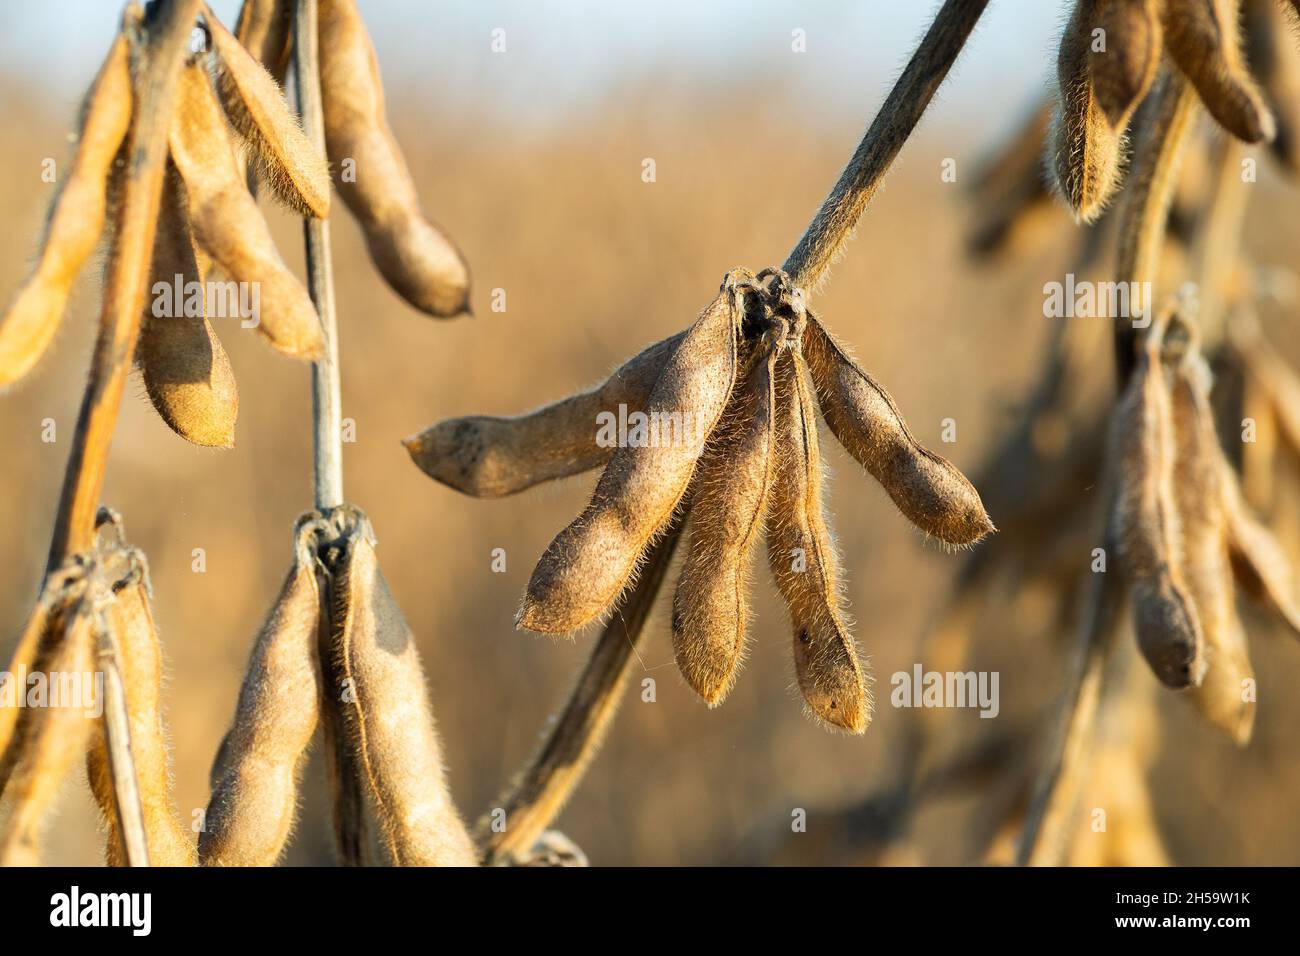 Close up of the soy bean plant in the field Stock Photo